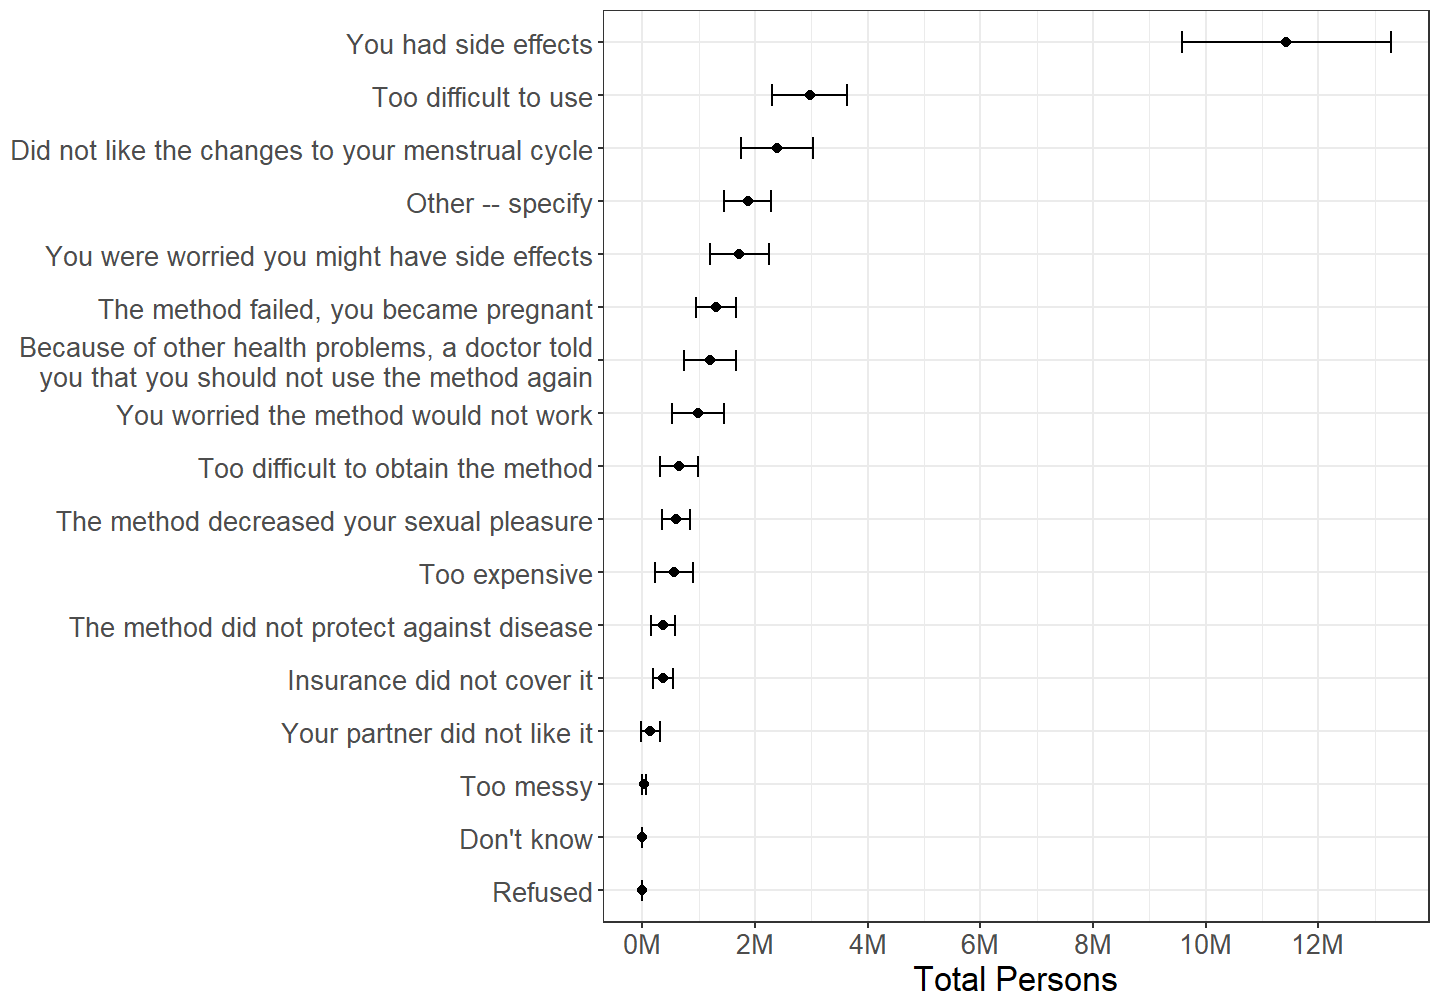 Females categorized by reason for dissatisfaction with contraceptive pills, with persons mentioning multiple reasons counted multiple times, among those who have ever discontinued using pills due to dissatisfaction.